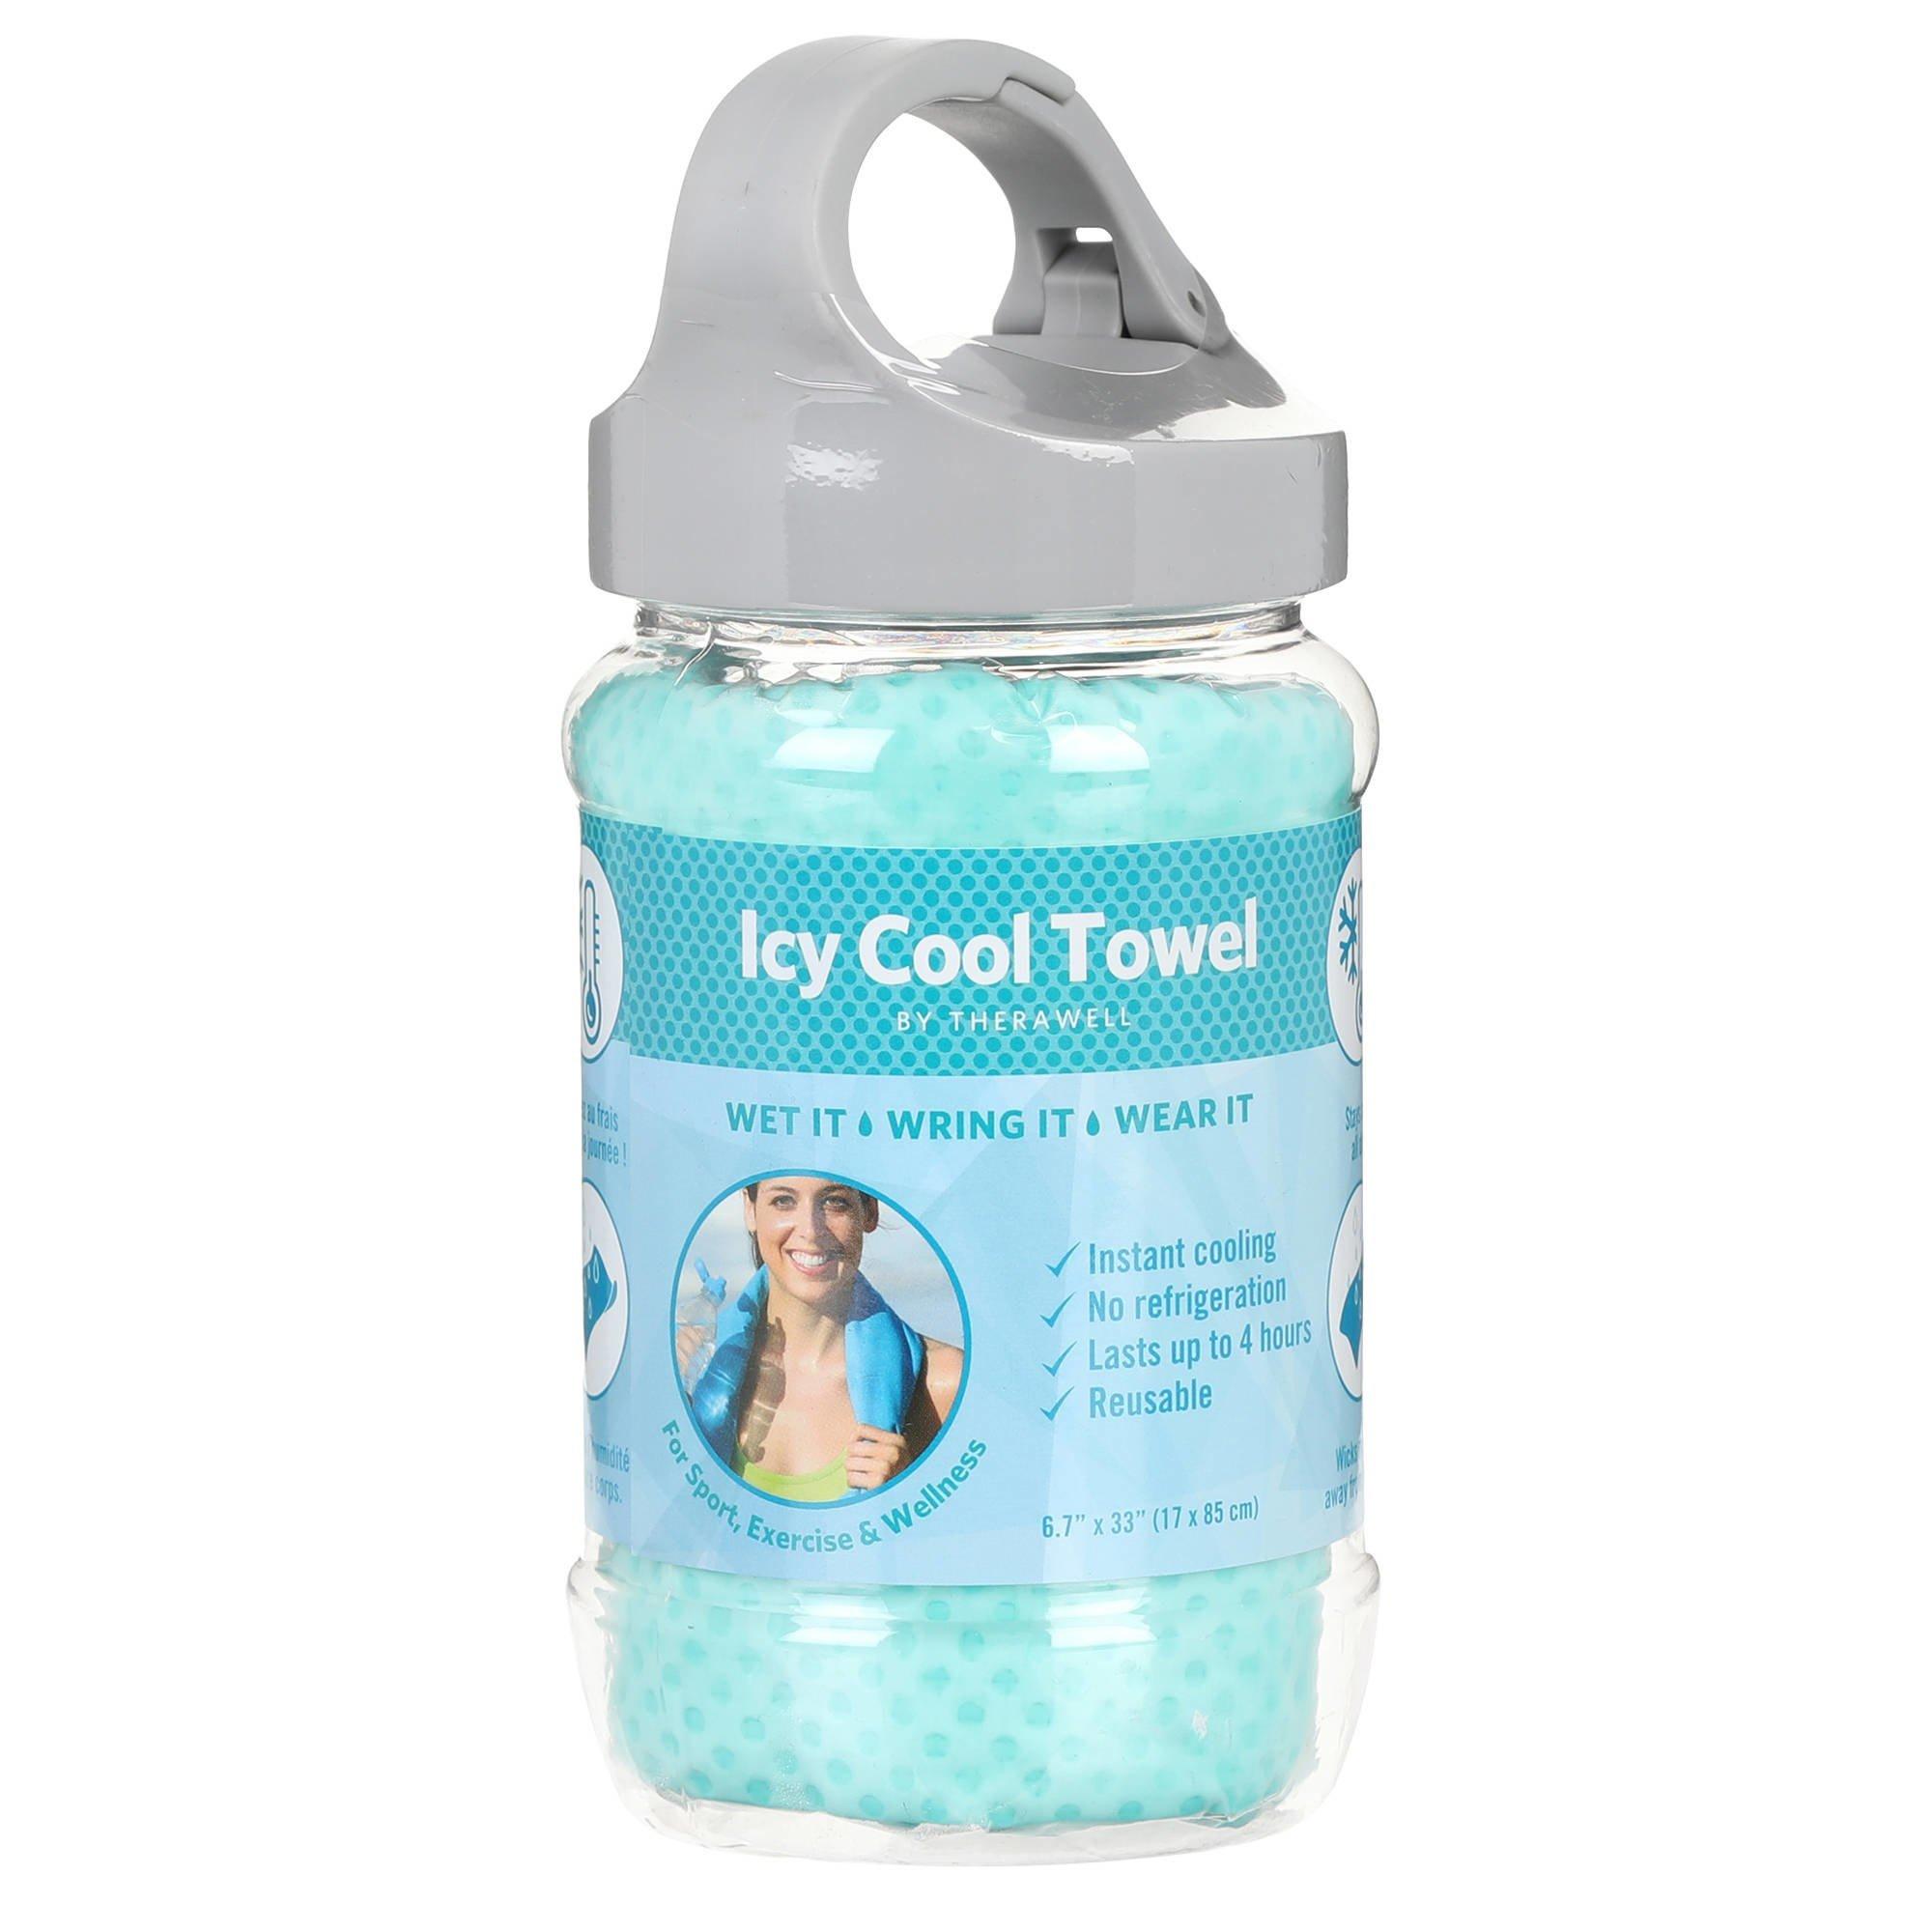 icy cool towel